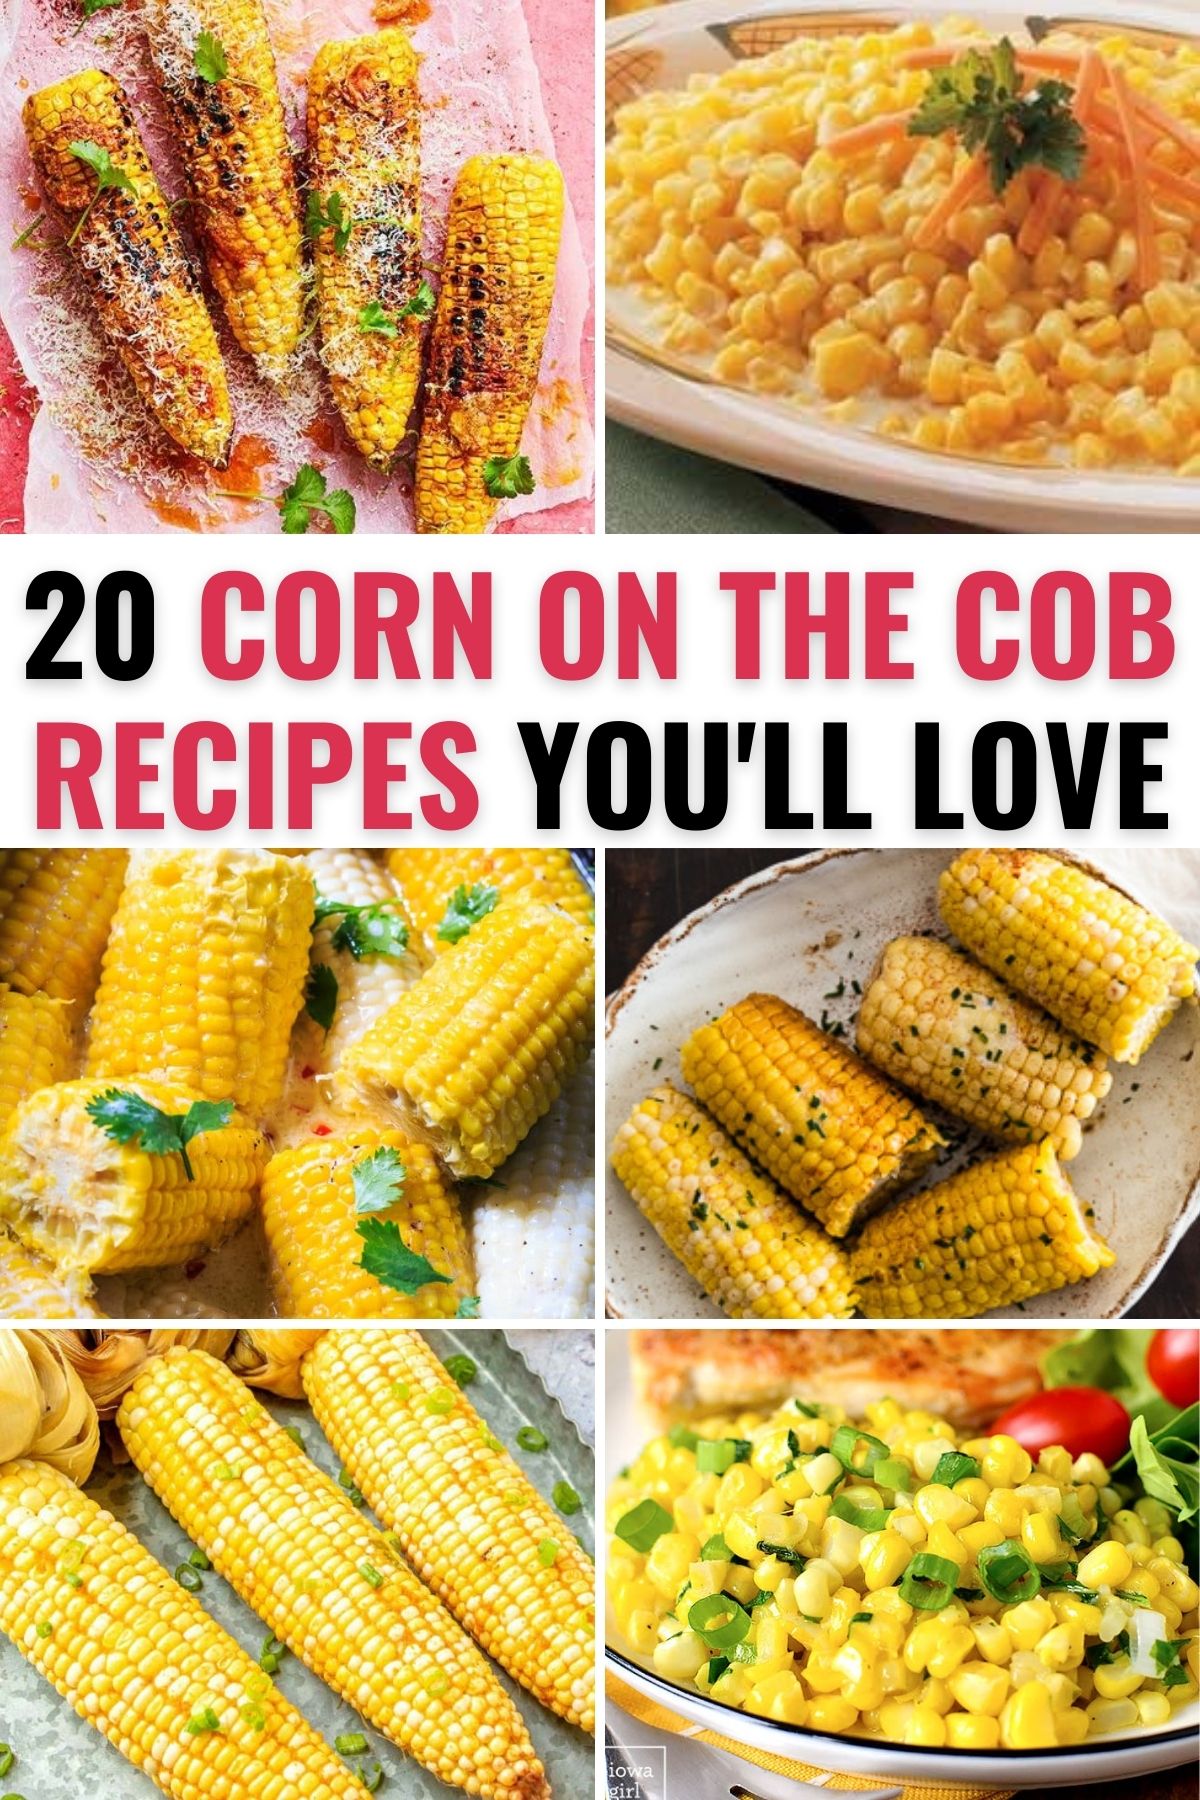 A collection of buttered corn on the cob recipes